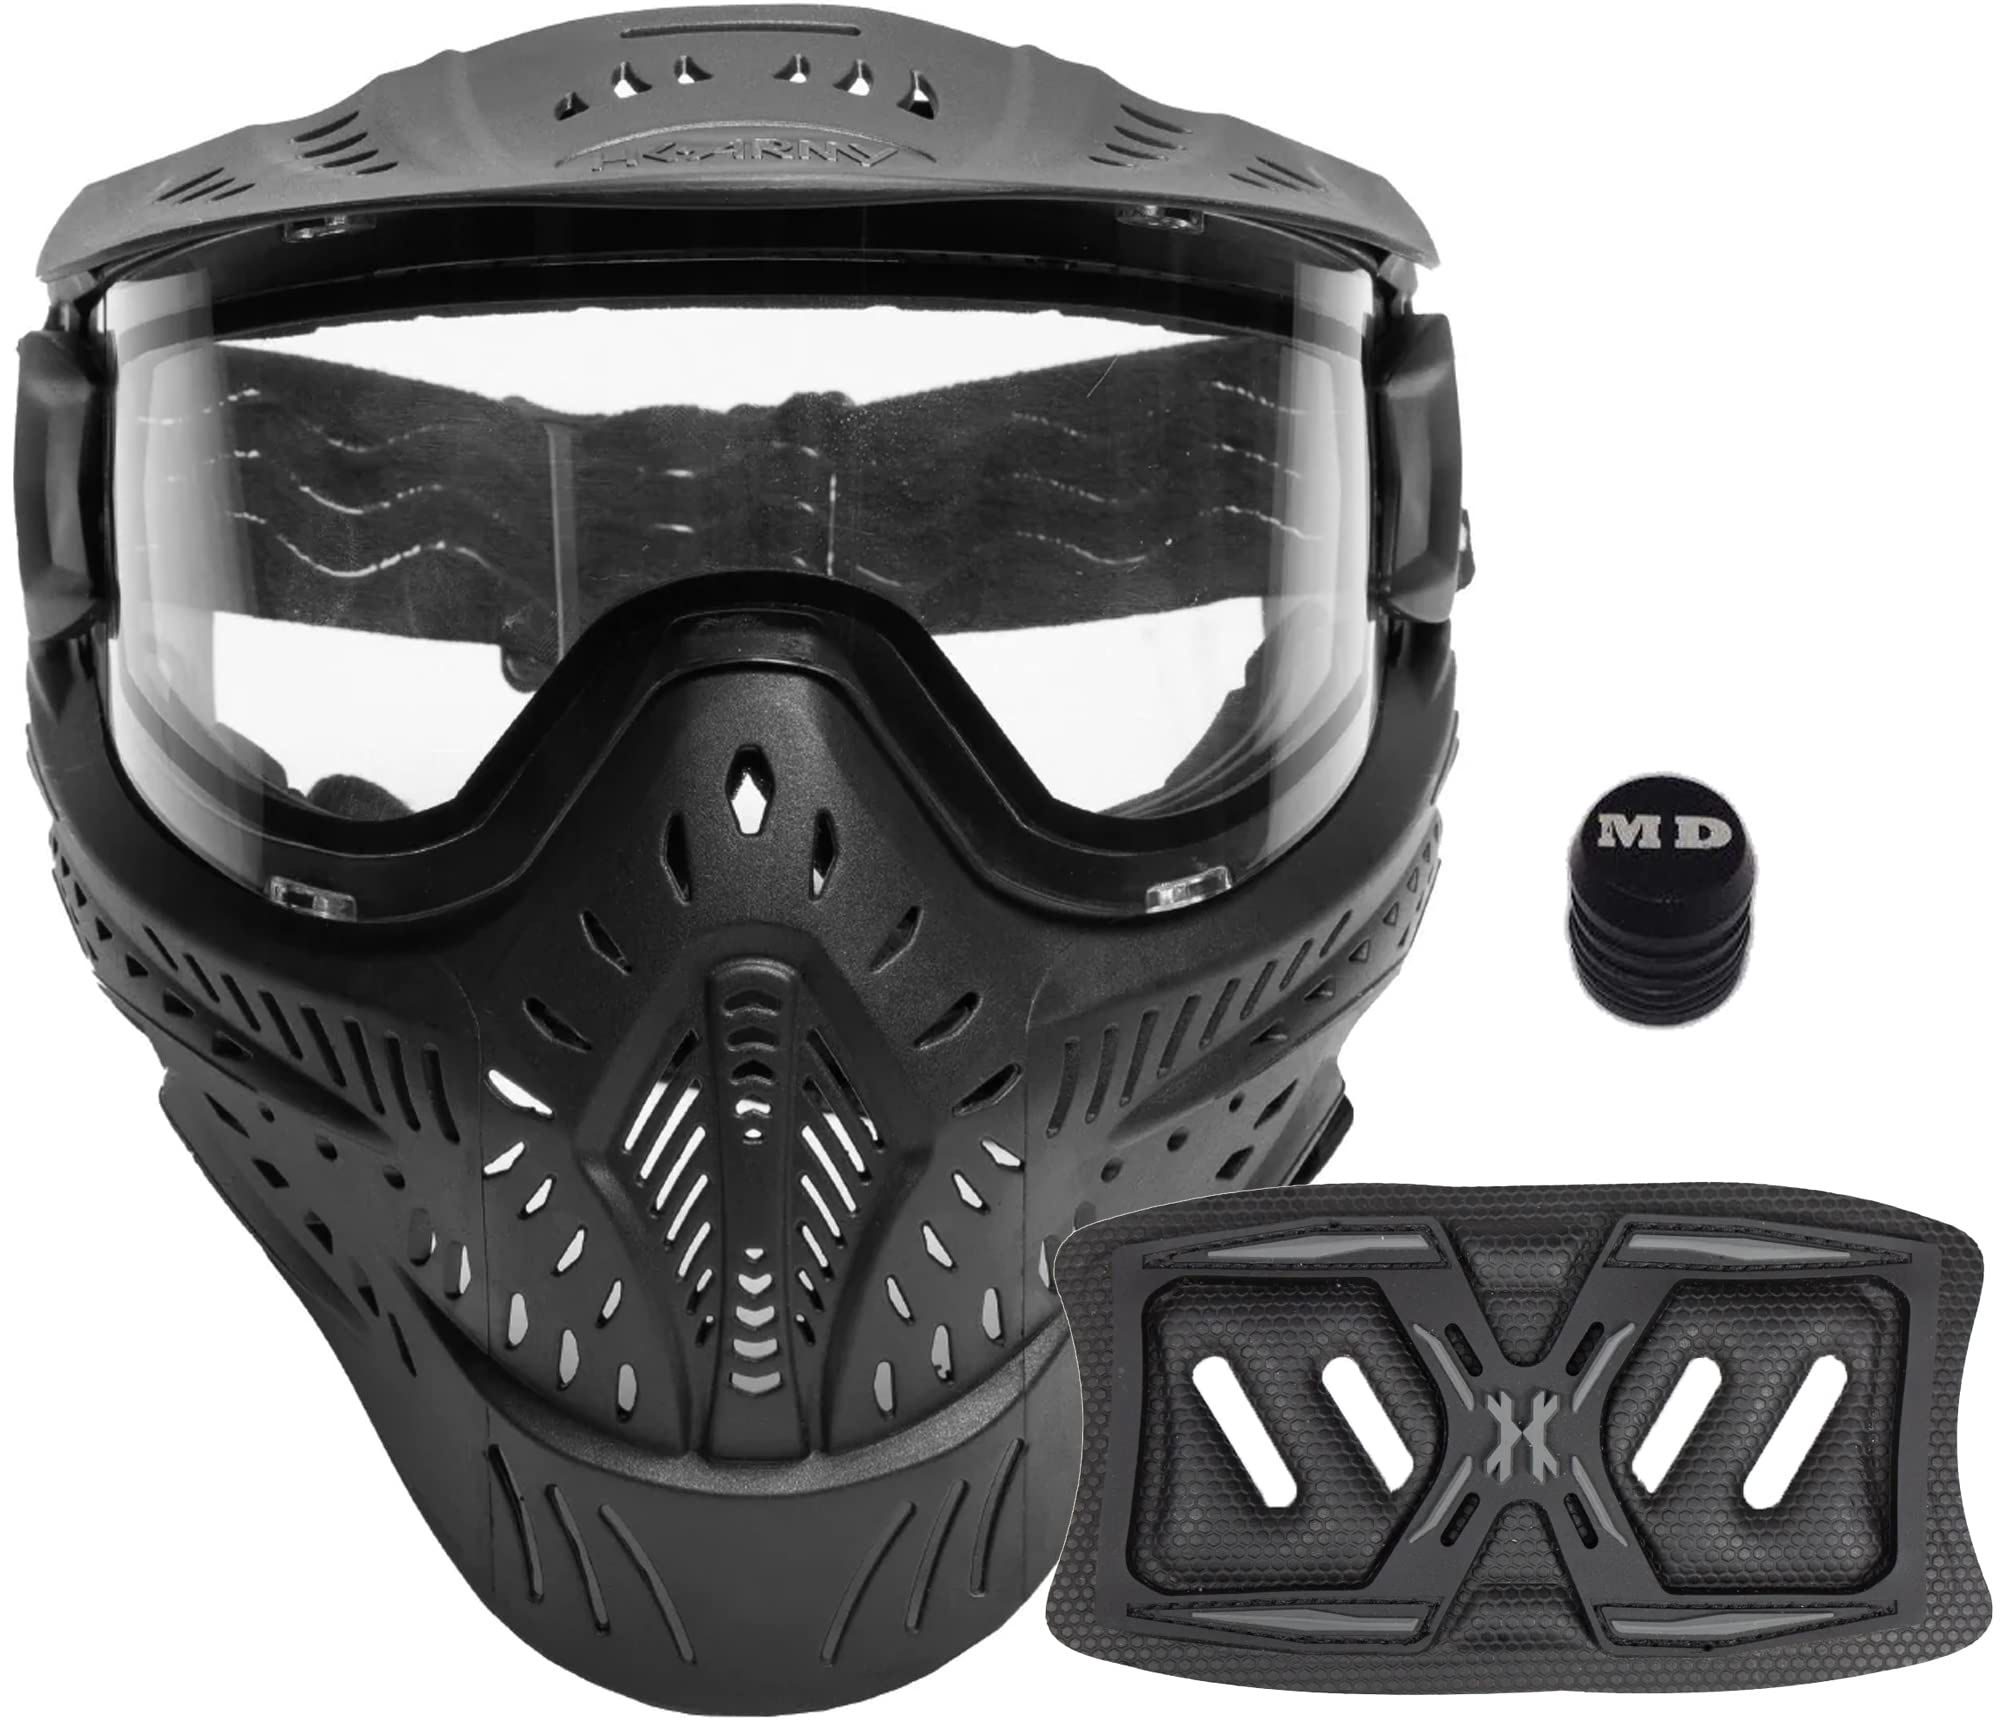 Maddog HK Army HSTL Goggle Thermal Anti-Fog Paintball Mask w/Upgrade Strap  Pad Combo + HPA Paintball Tank Fill Nipple Protector